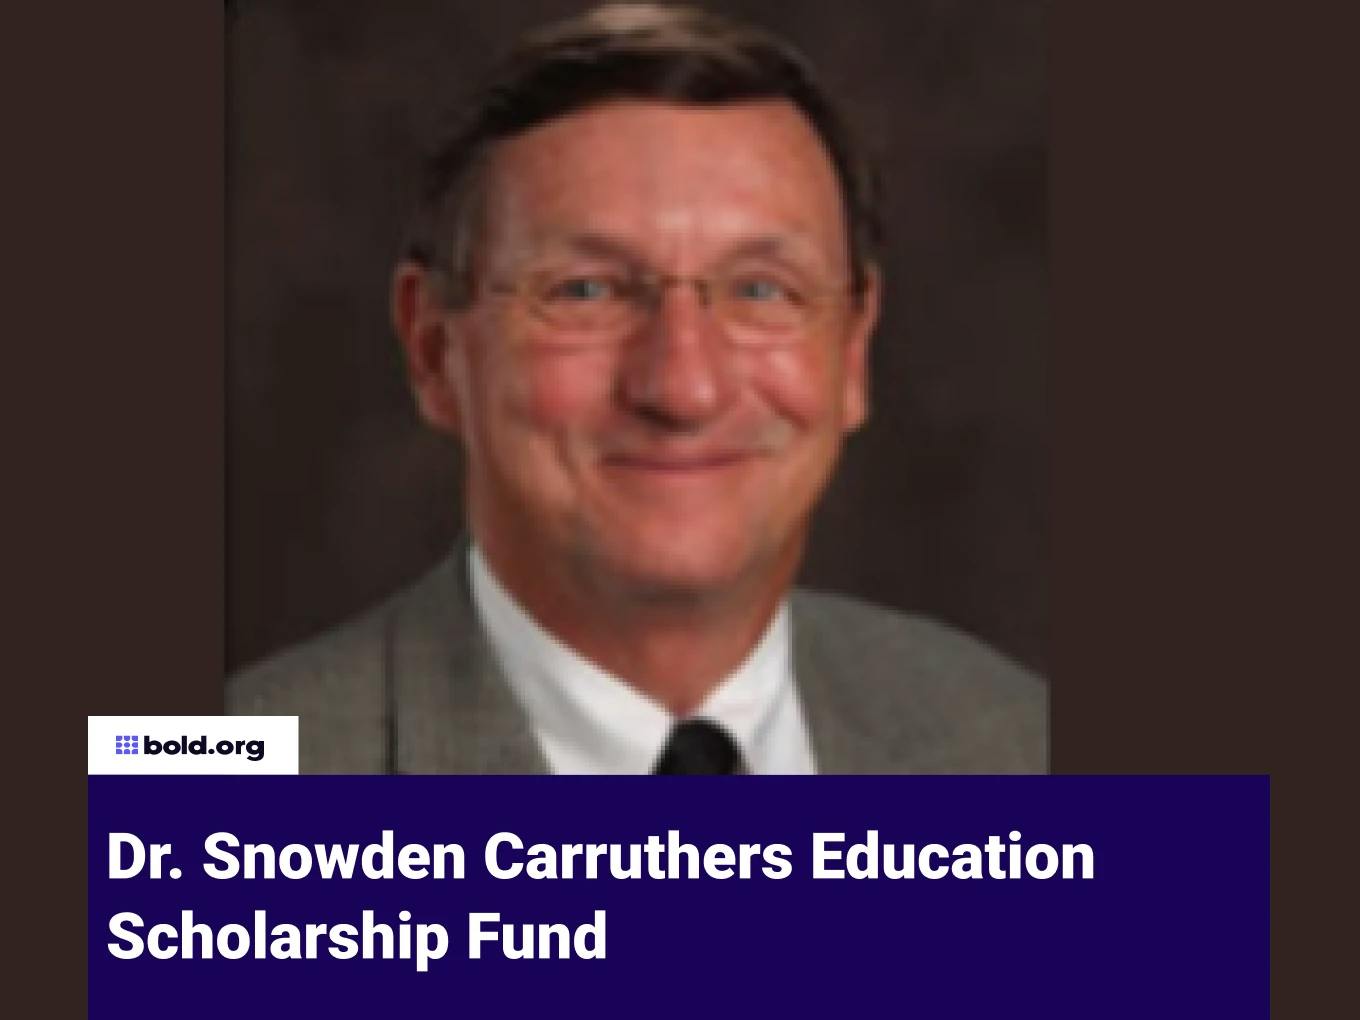 Dr. Snowden Carruthers Education Scholarship Fund